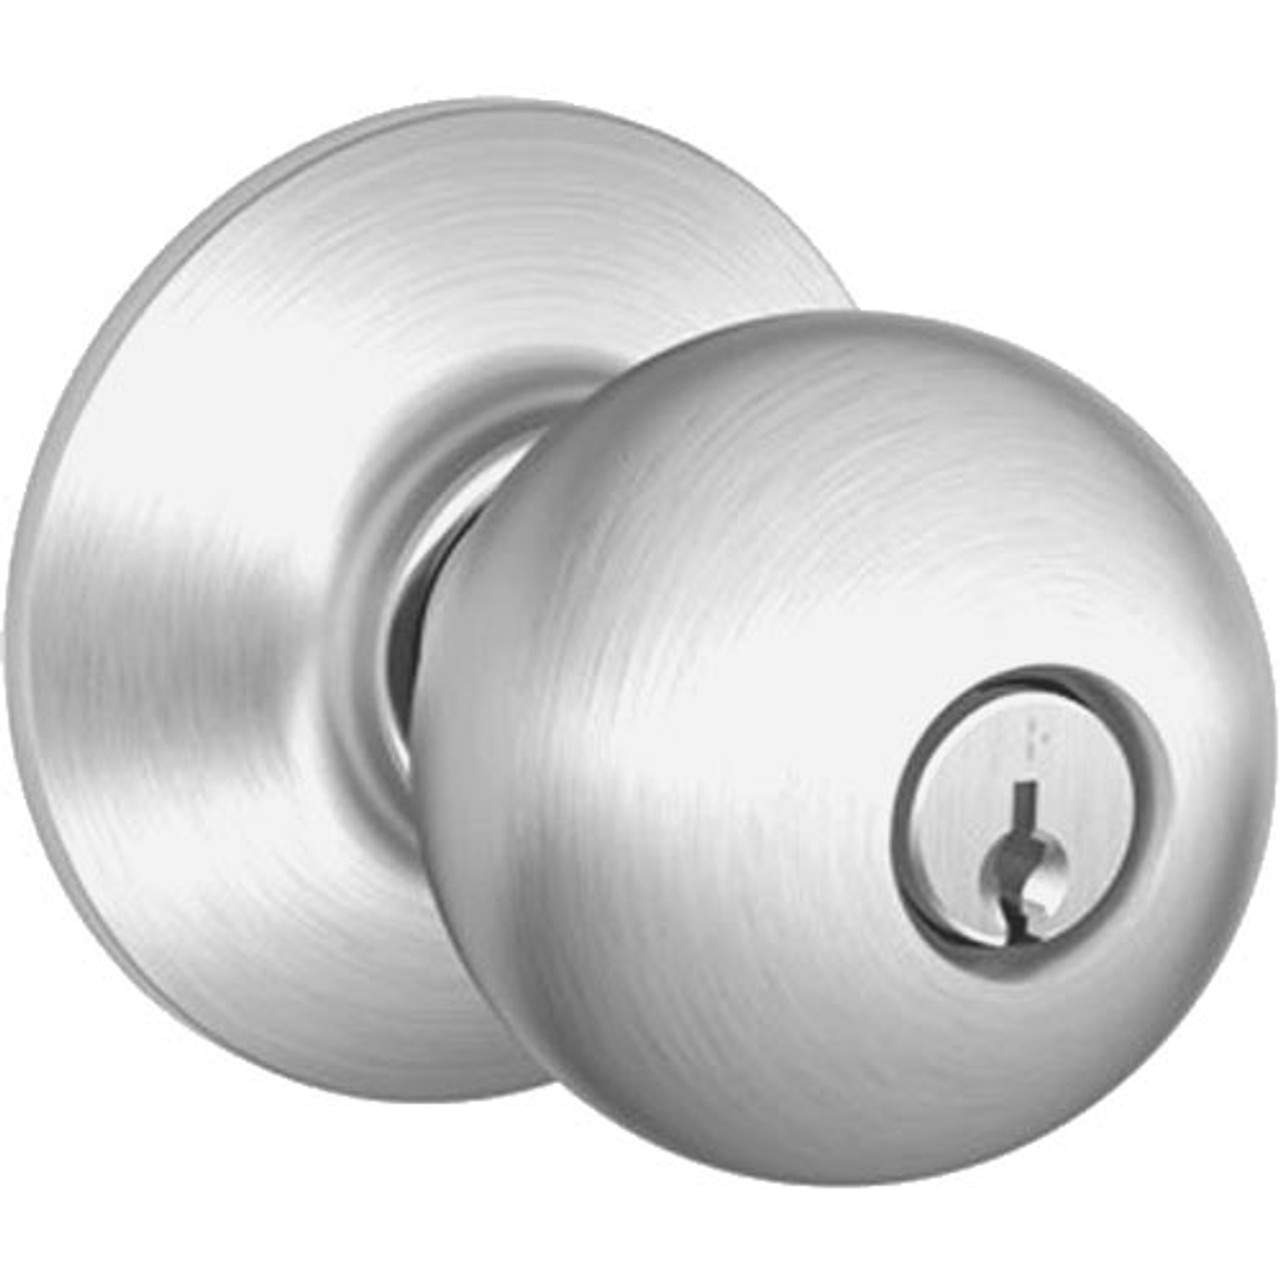 A70PD-ORB-626 Schlage Orbit Commercial Cylindrical Lock in Satin Chromium Plated